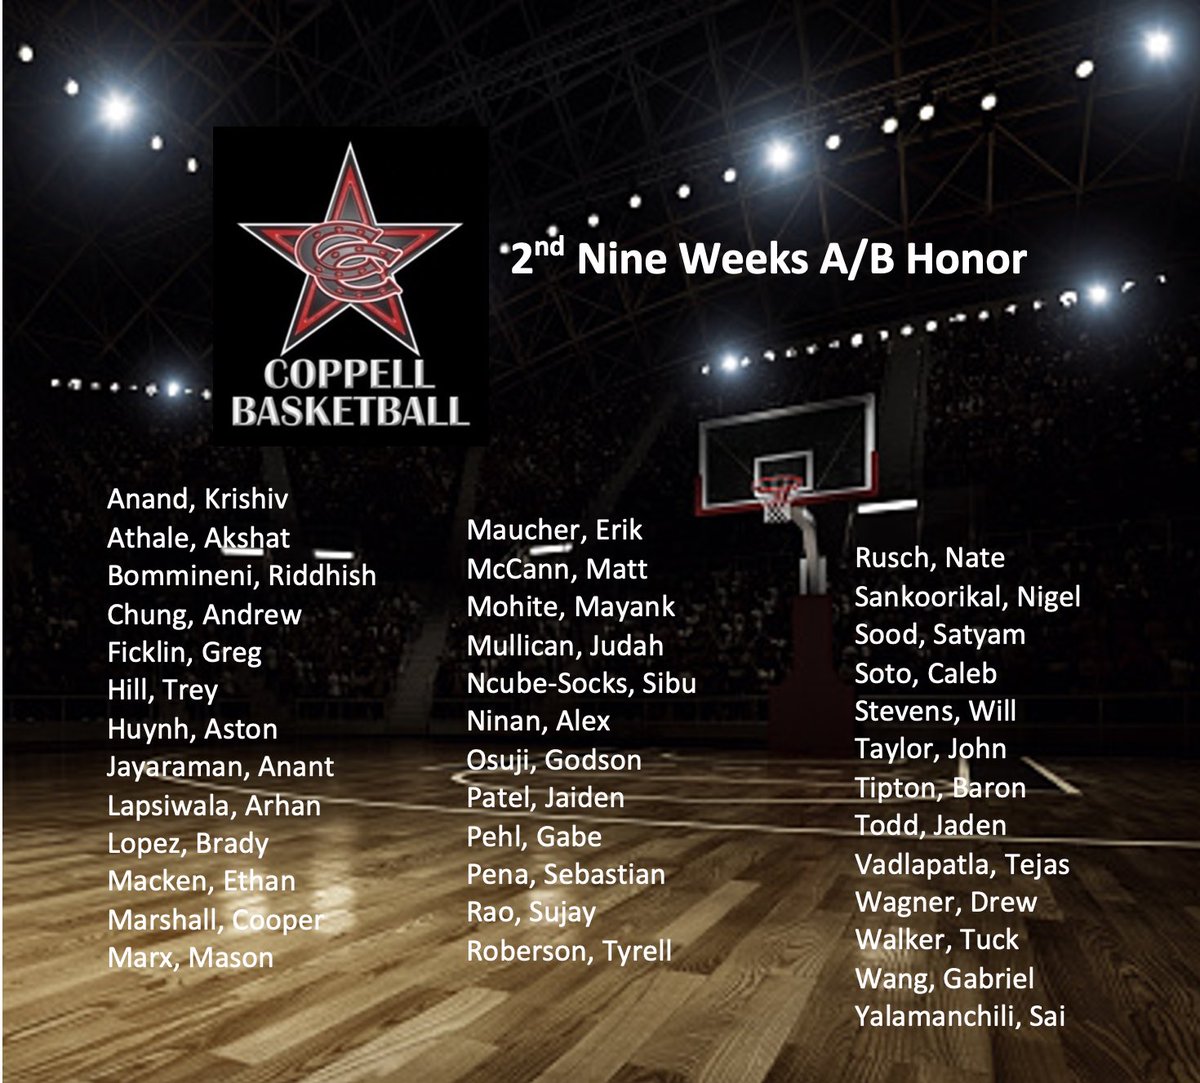 Proud of our 🏀 student athletes for putting in the work both in the classroom and on the court. #DefyOrdinary @CoppellHigh @CoppellSports1 @Coppellisd